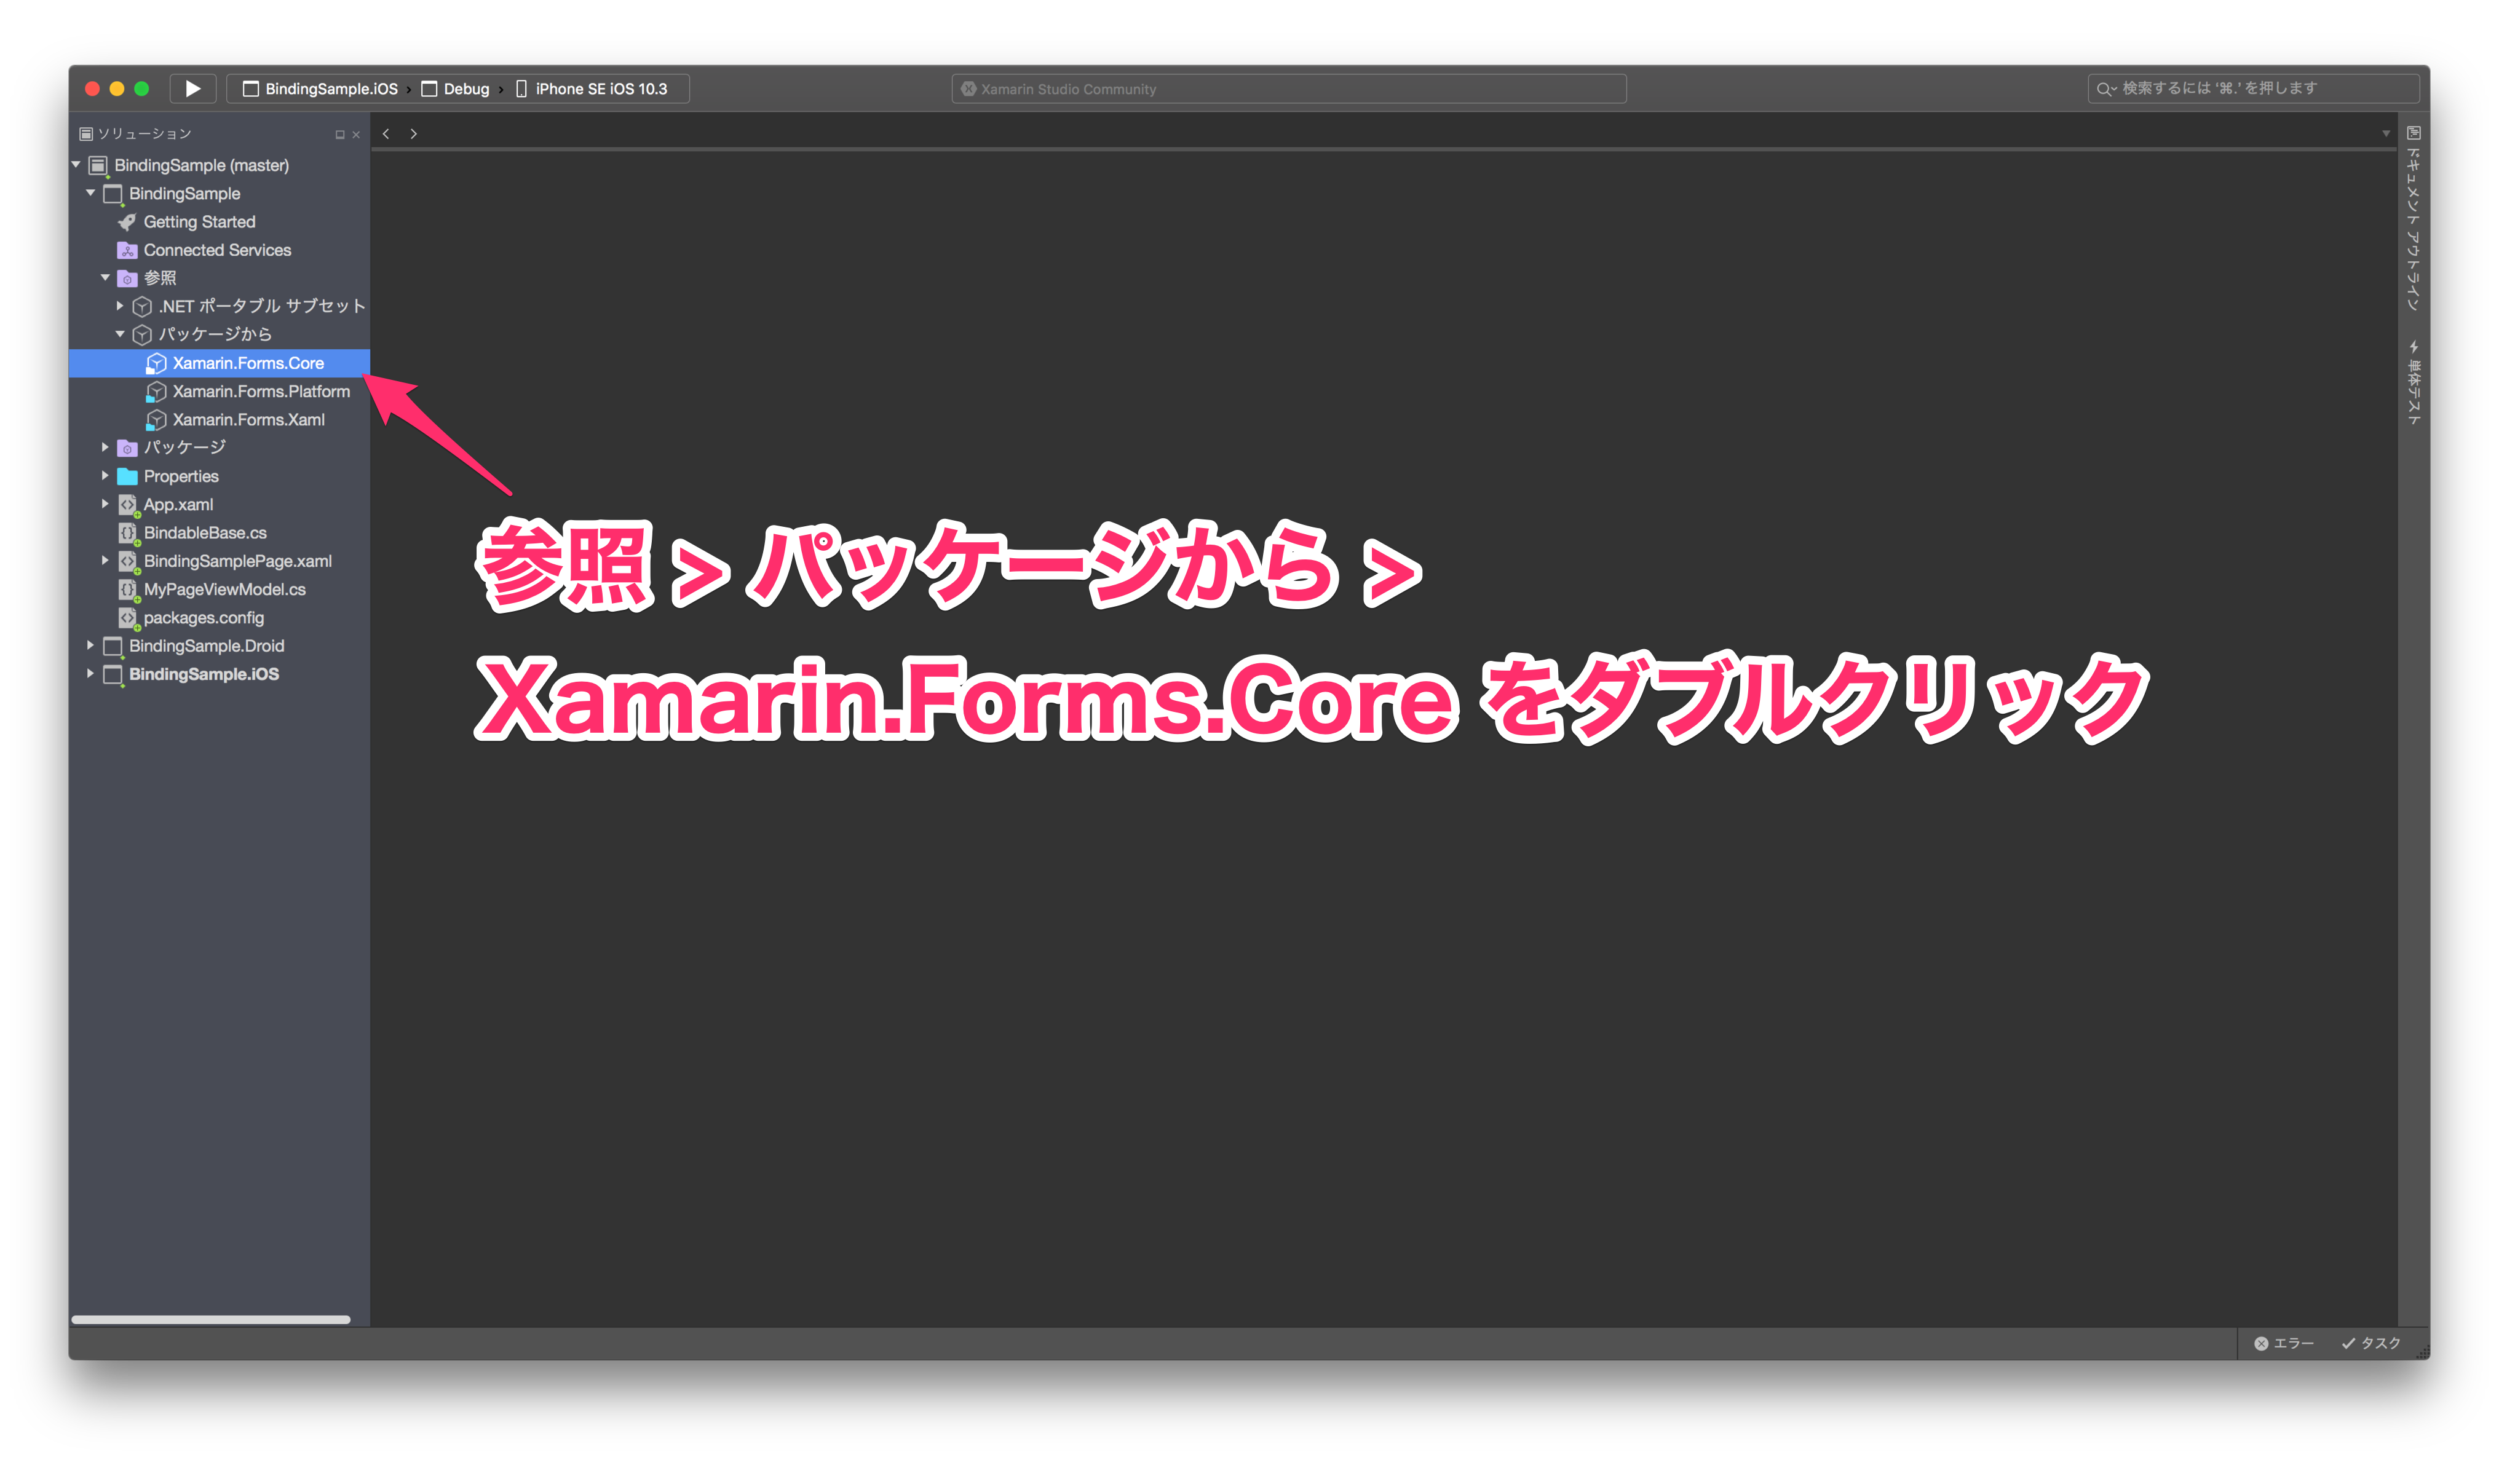 xamarin_forms_core_assembly_browser_001